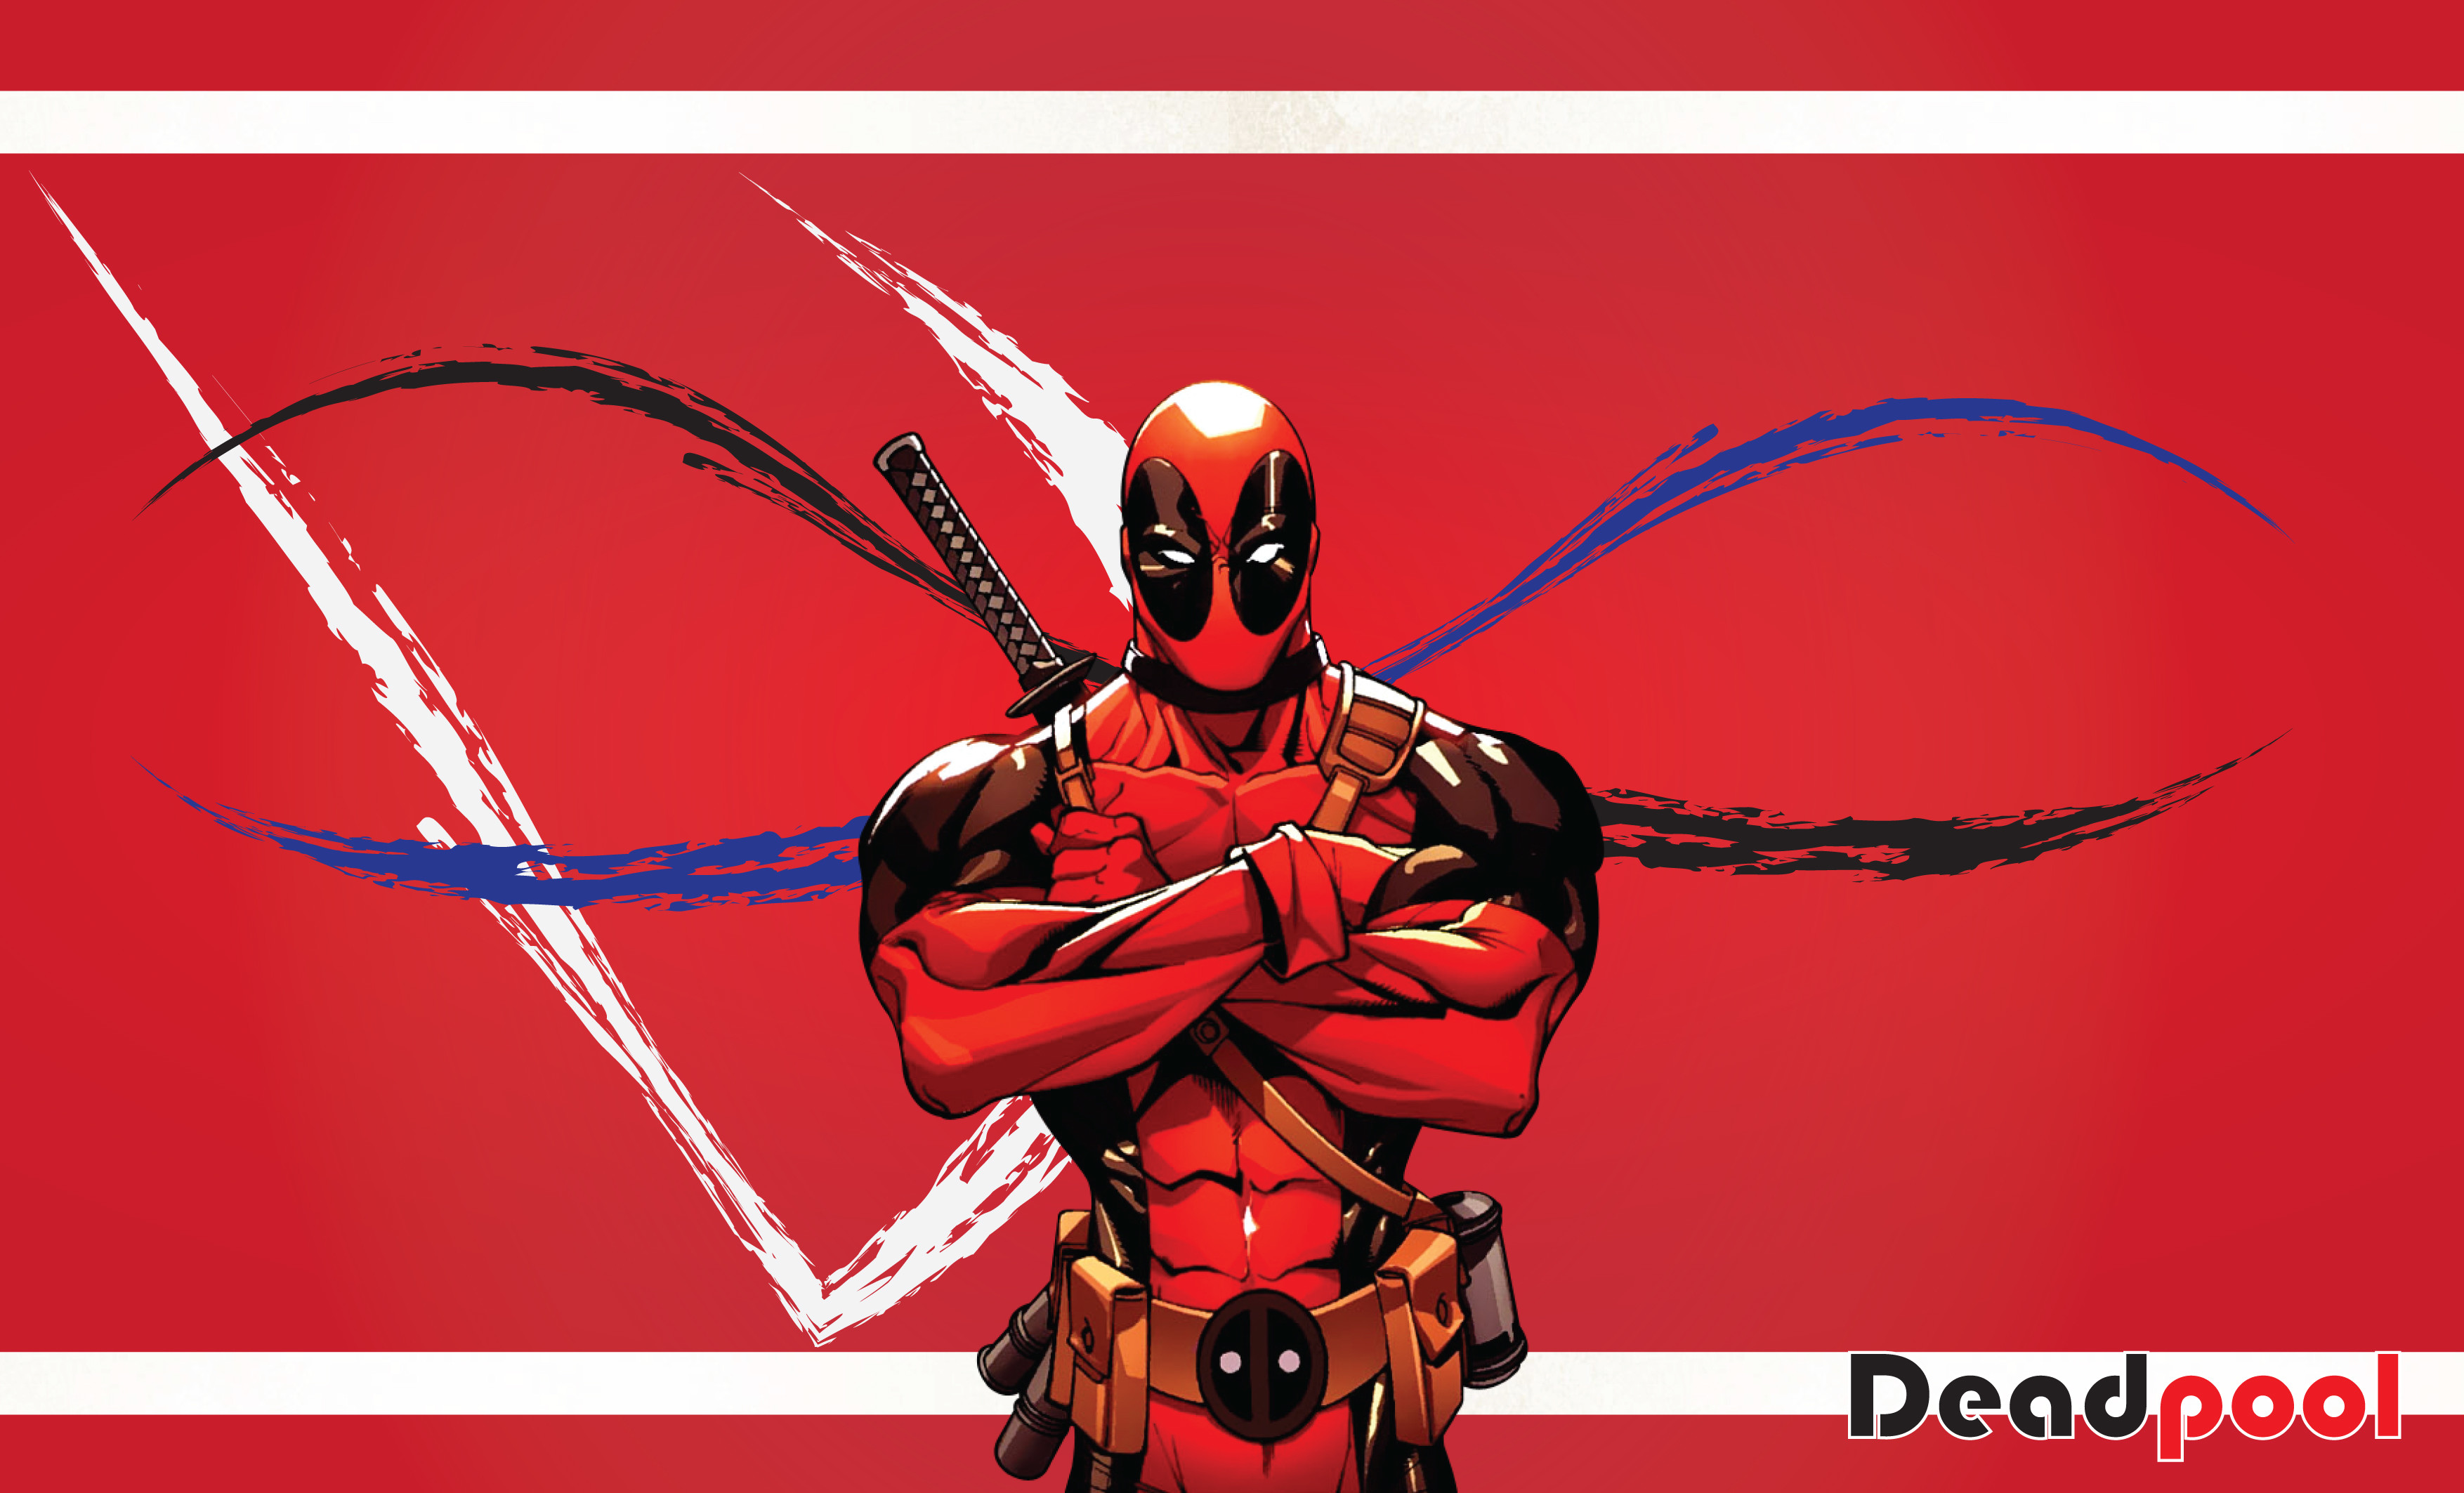 3508x2126 Cool Wallpaper with Deadpool Cartoon Character (27 Pics) | HD Wallpapers |  Wallpapers Download | High Resolution Wallpapers